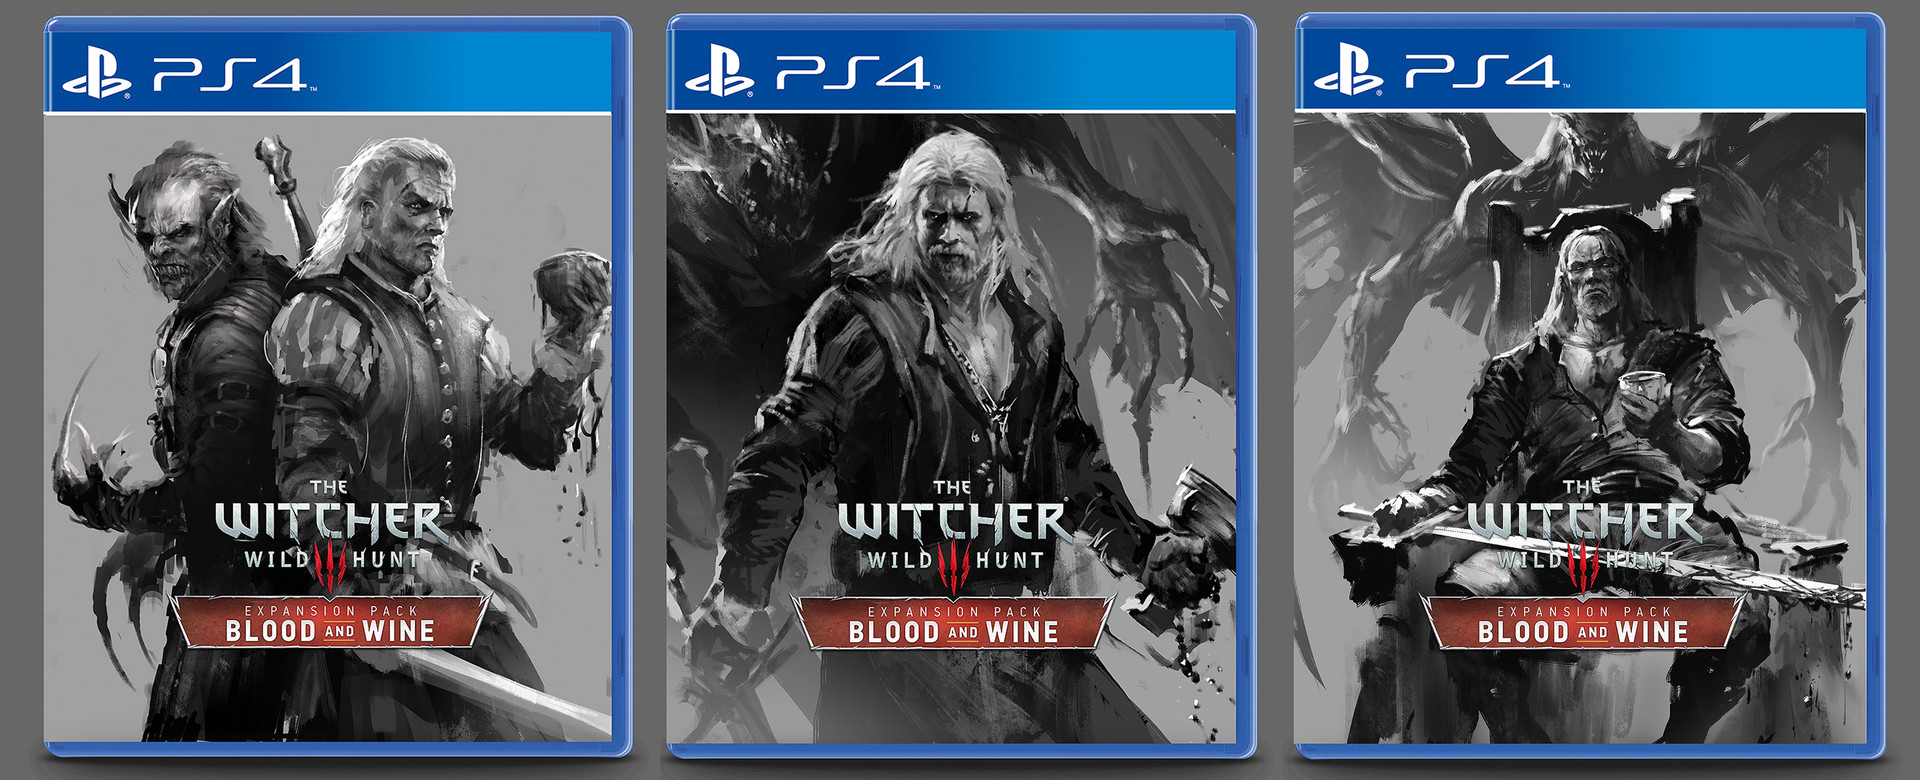 The Witcher 3: Blood And Wine Cover Art Sketches Reveal New Info About The DLC1920 x 780